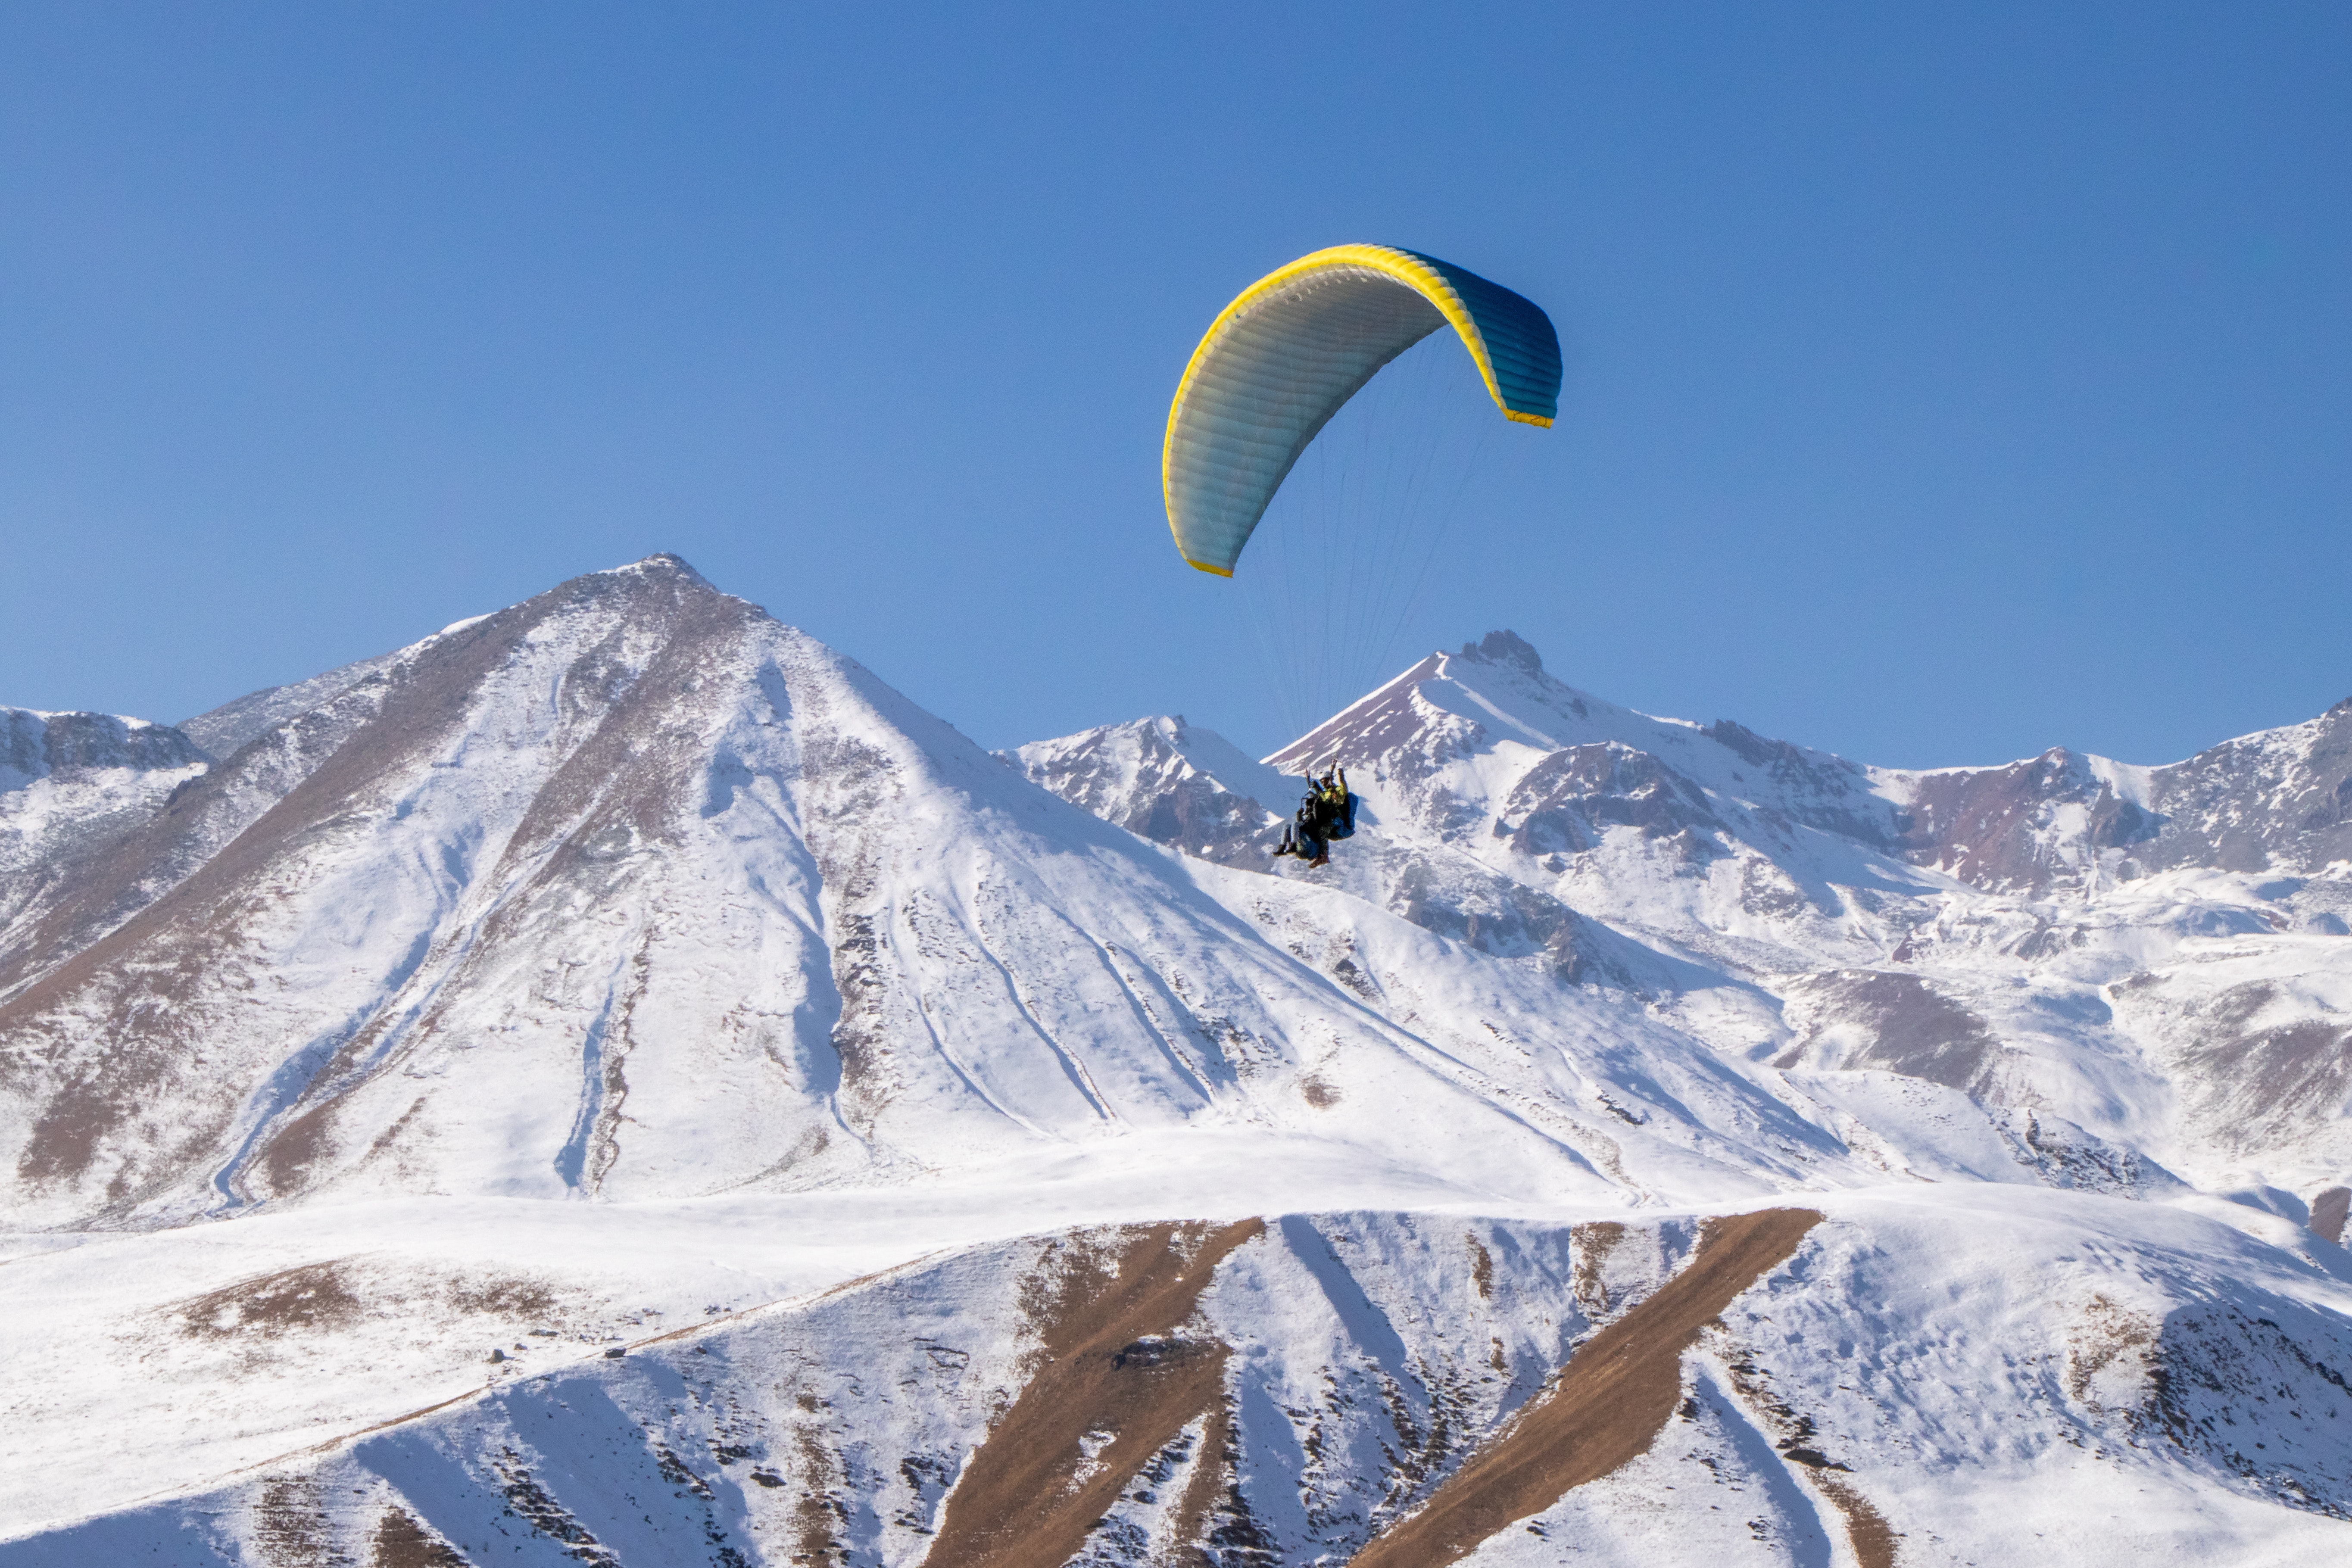 extreme sports parachuters with snowy mountains